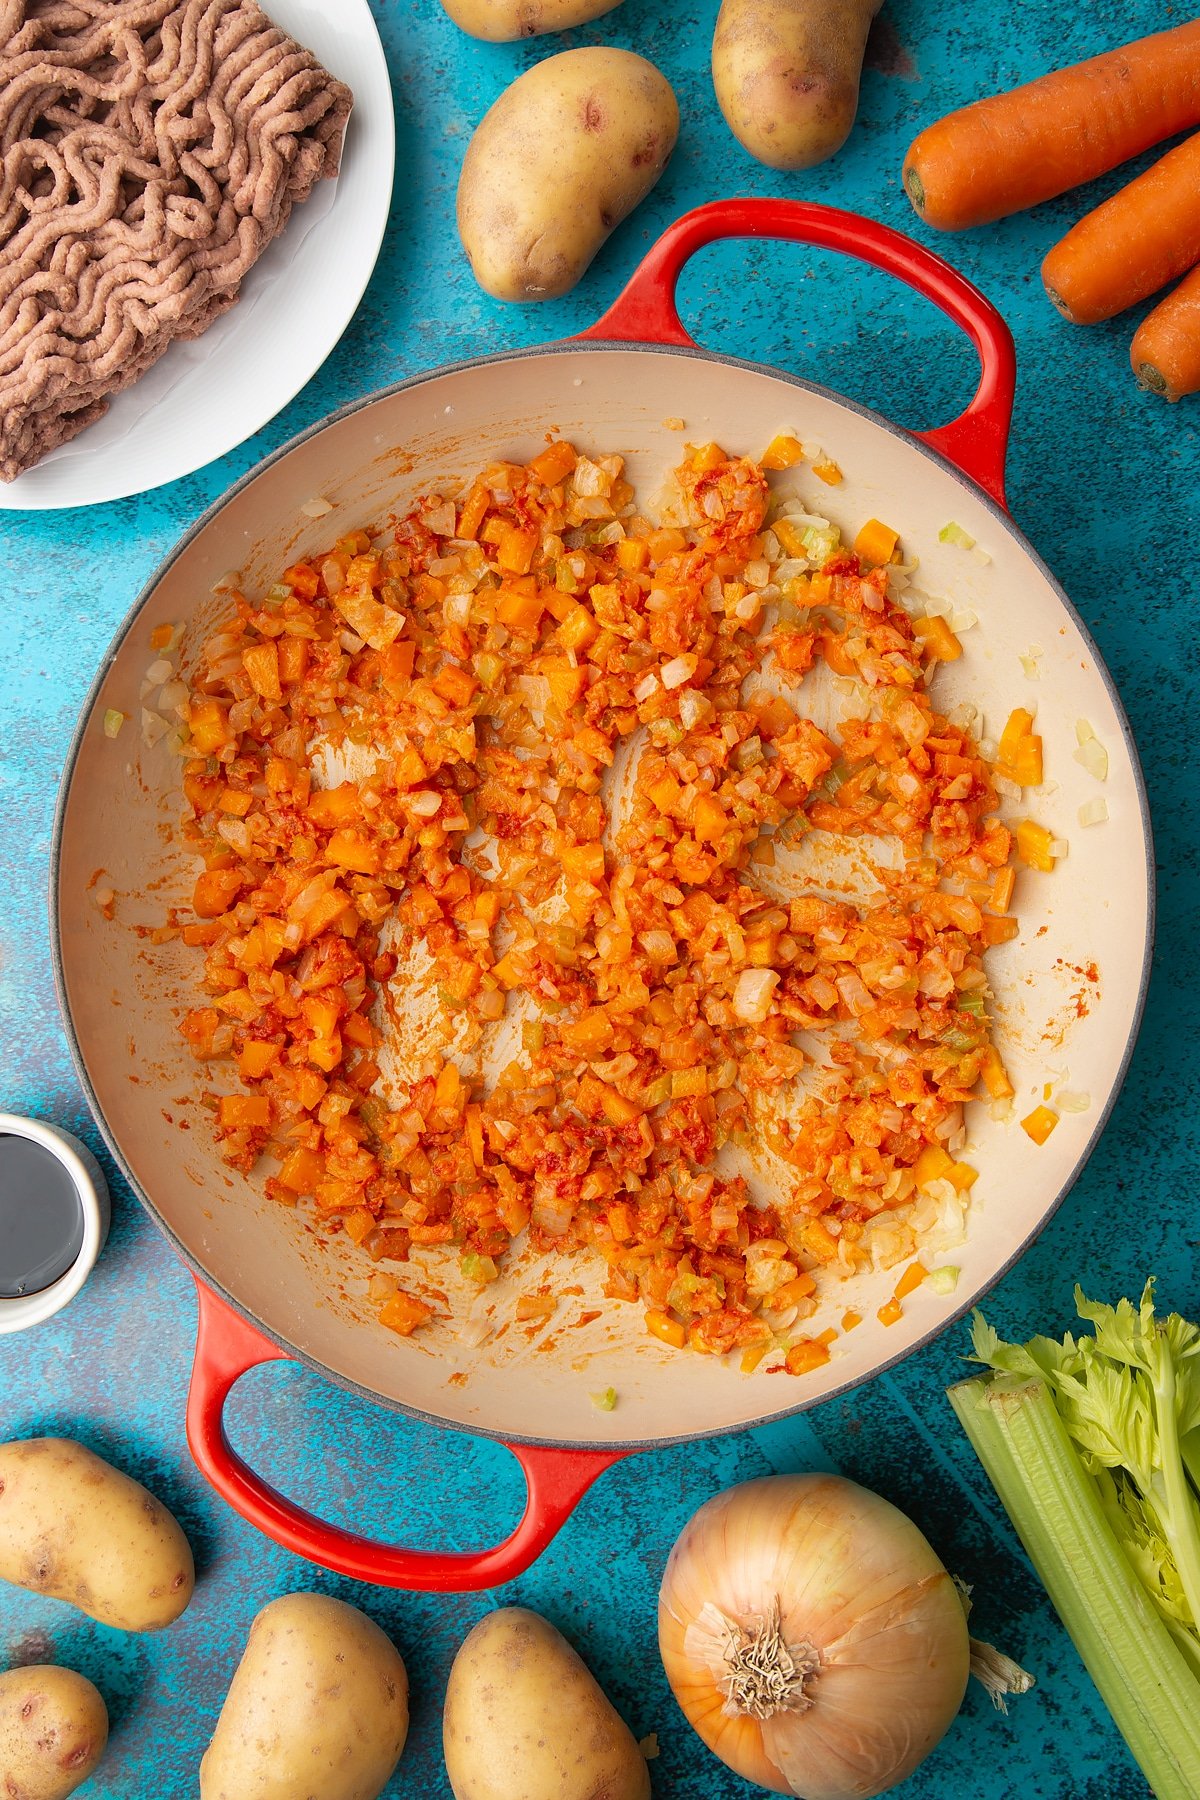 Fried onions, celery, carrots and garlic, flour and tomato puree in a large pan. Ingredients to make vegan cottage pie surround the pan.